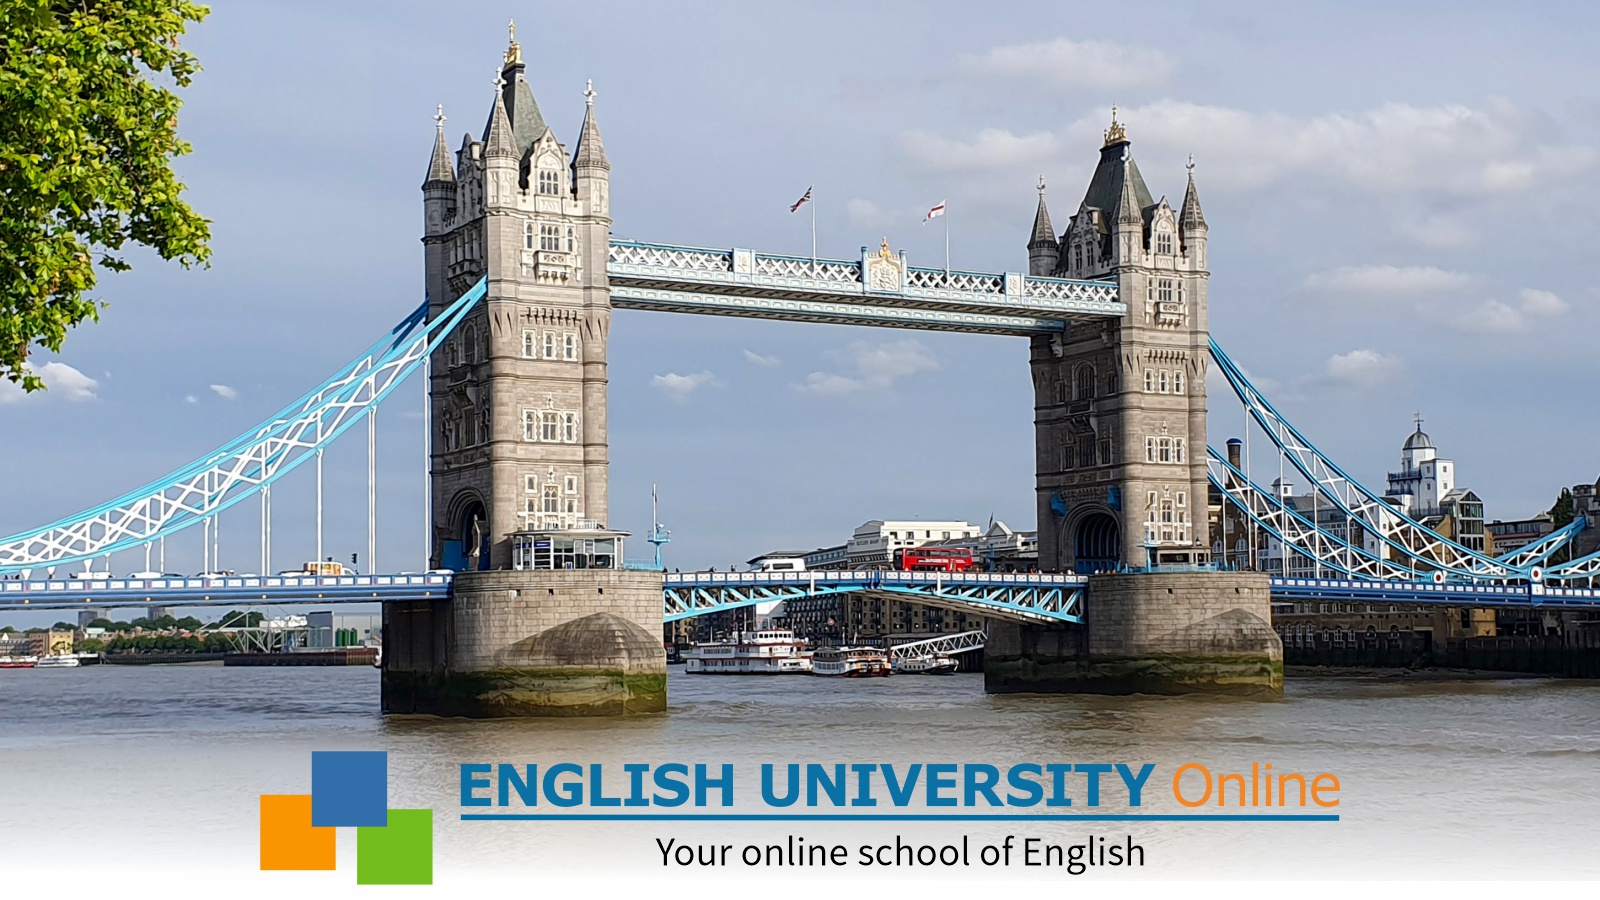 Business English / Essential A2 - ENGLISH UNIVERSITY Online